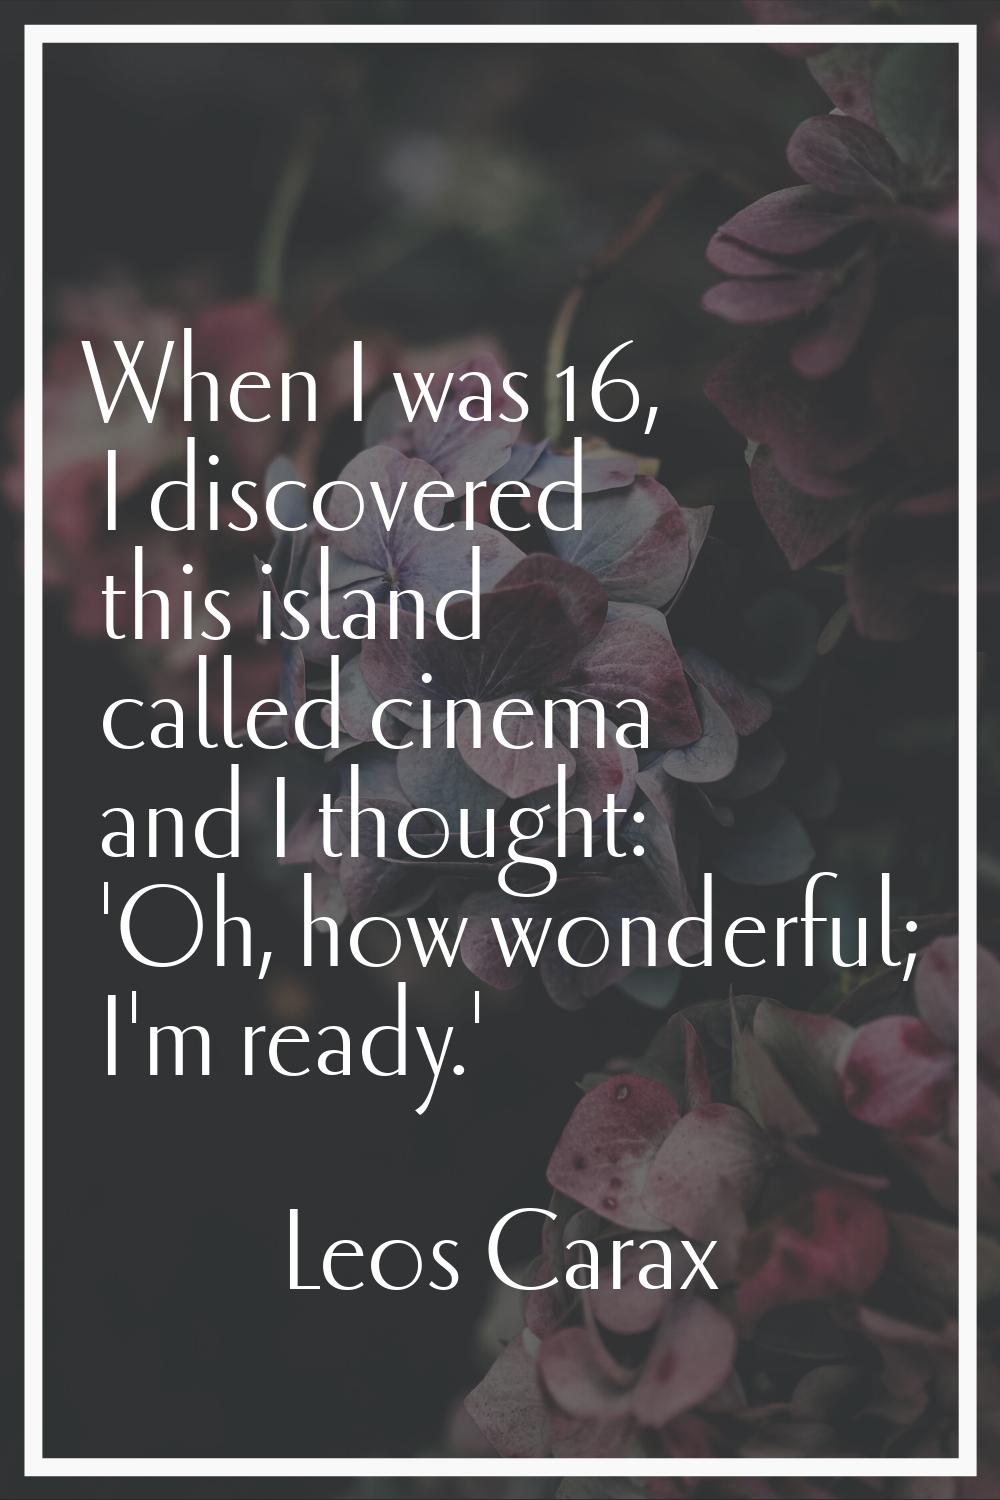 When I was 16, I discovered this island called cinema and I thought: 'Oh, how wonderful; I'm ready.